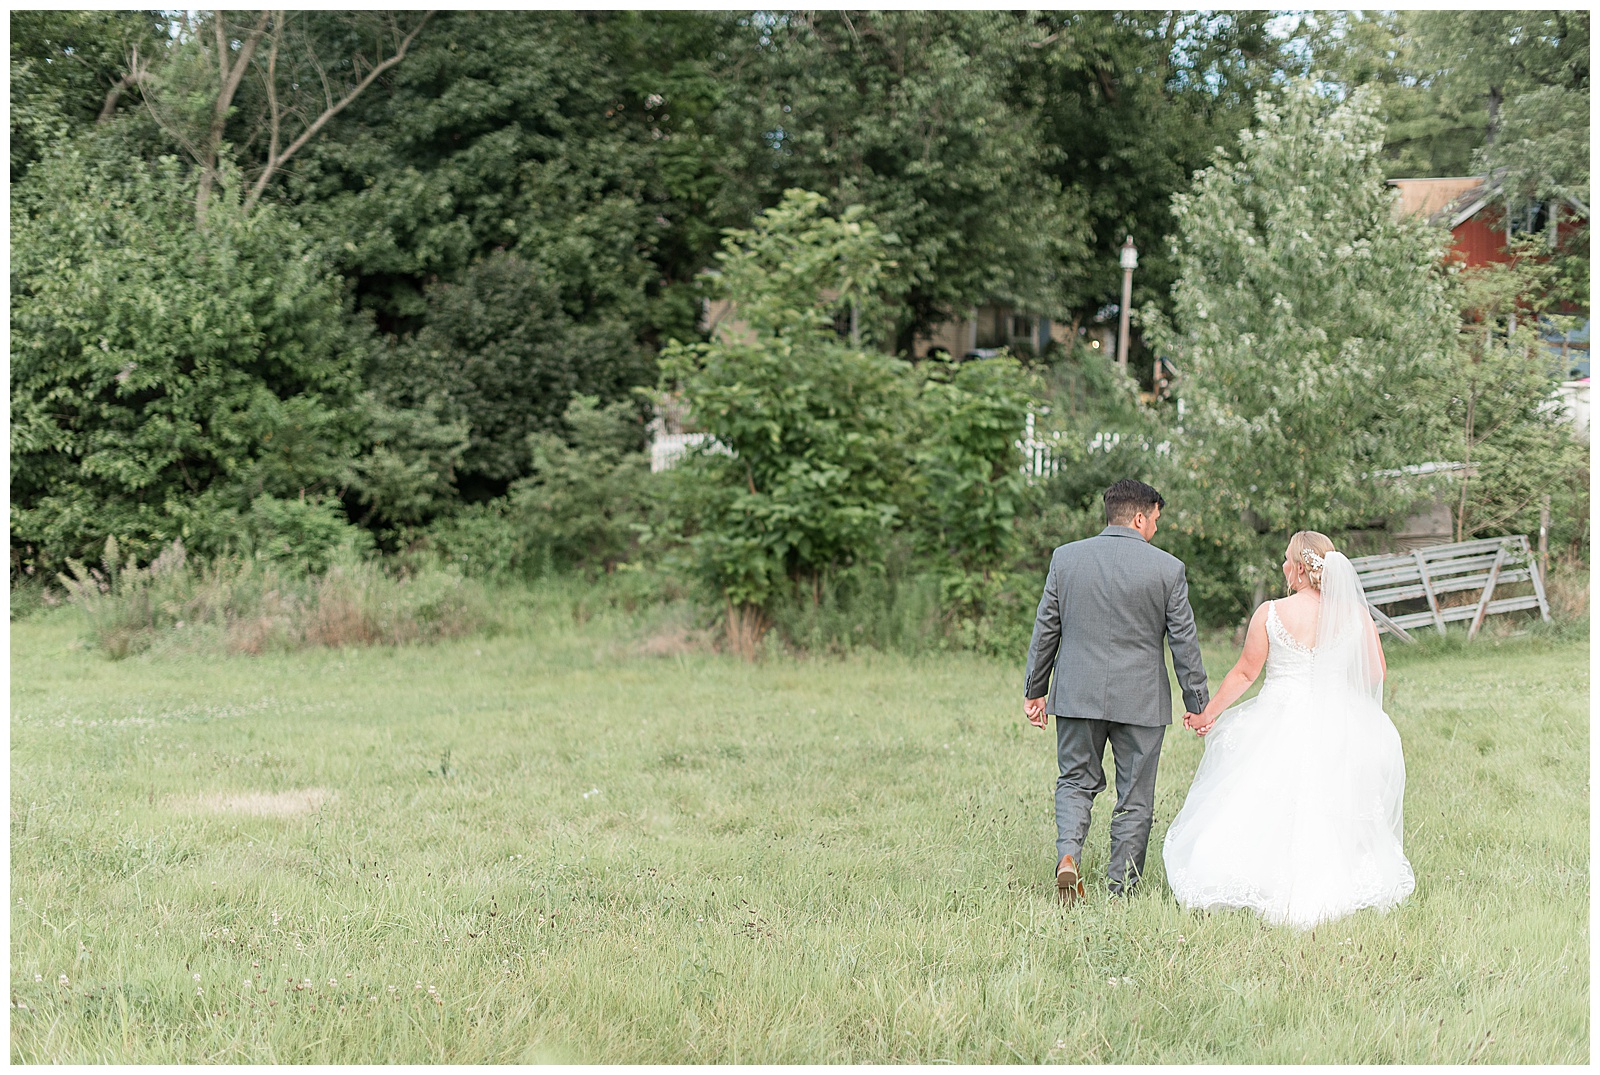 husband and wife walking away from camera smiling at each other through open field of tall grasses at Fallen Tree Farms Bed and Breakfast